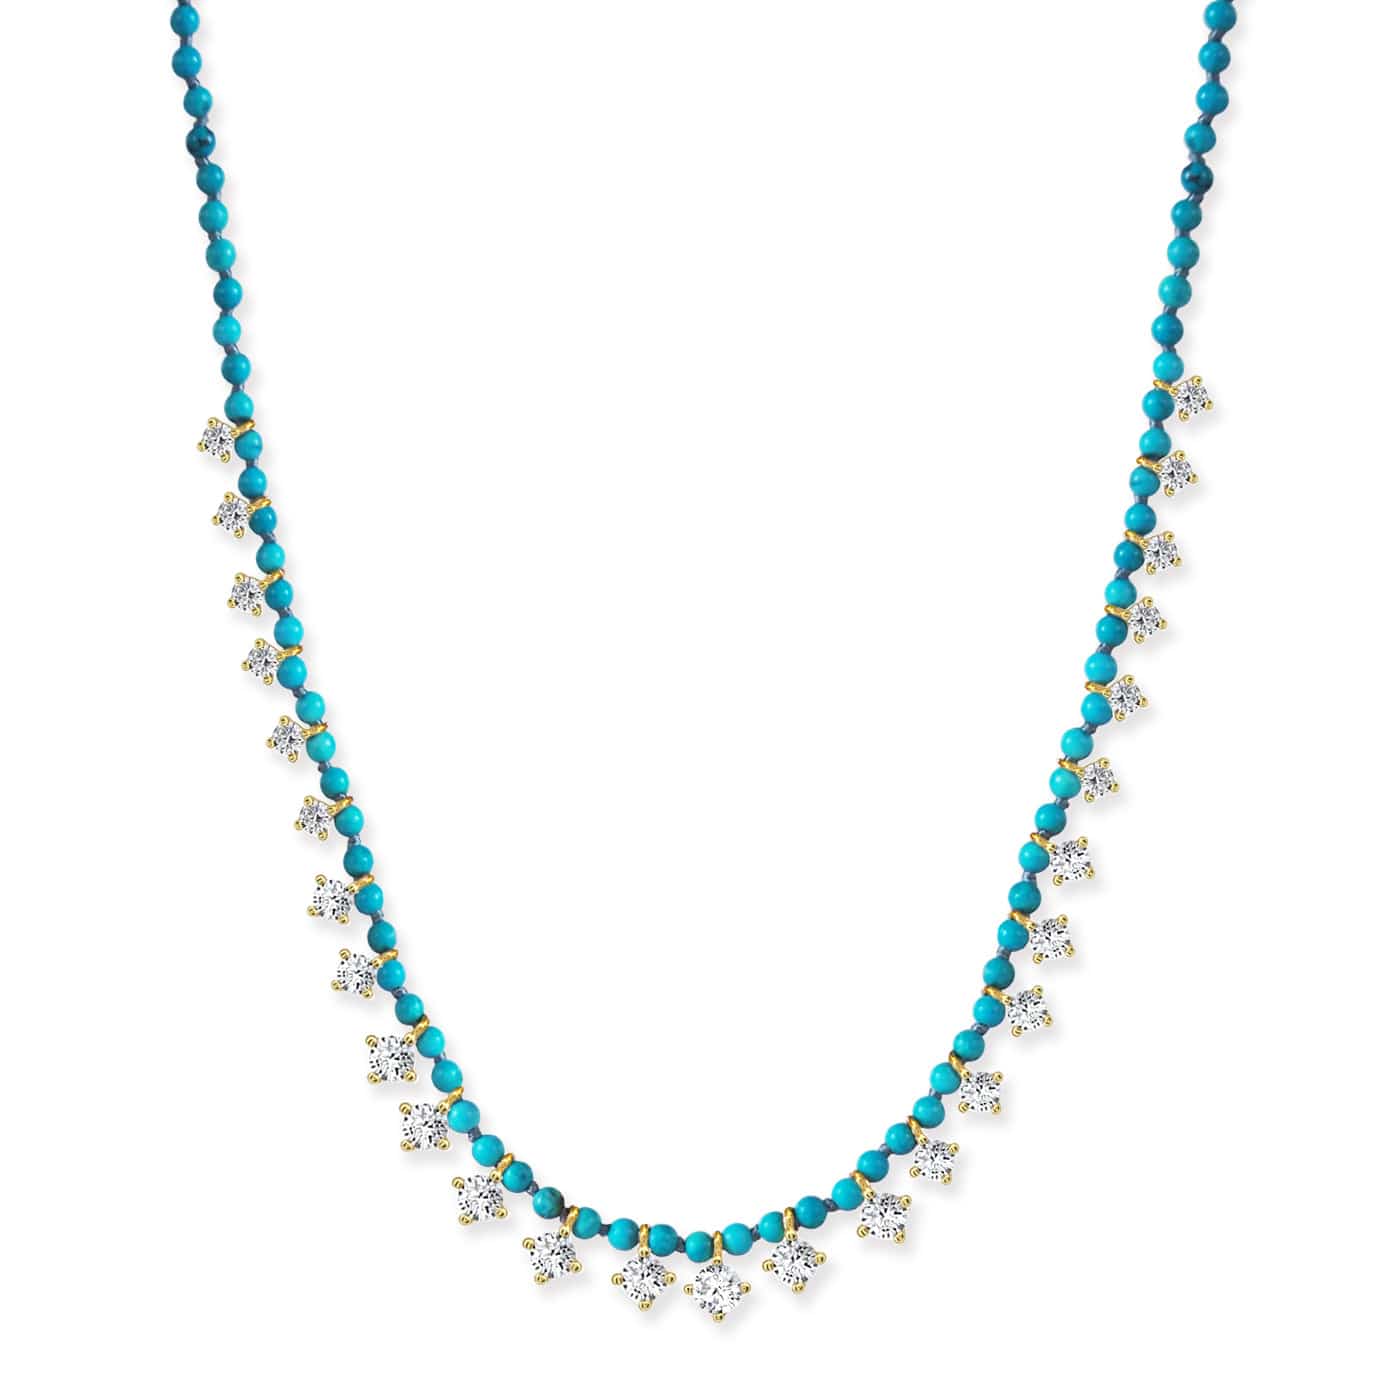 TAI JEWELRY Necklace Handmade Turquoise Beaded Necklace with Graduated CZ Stones